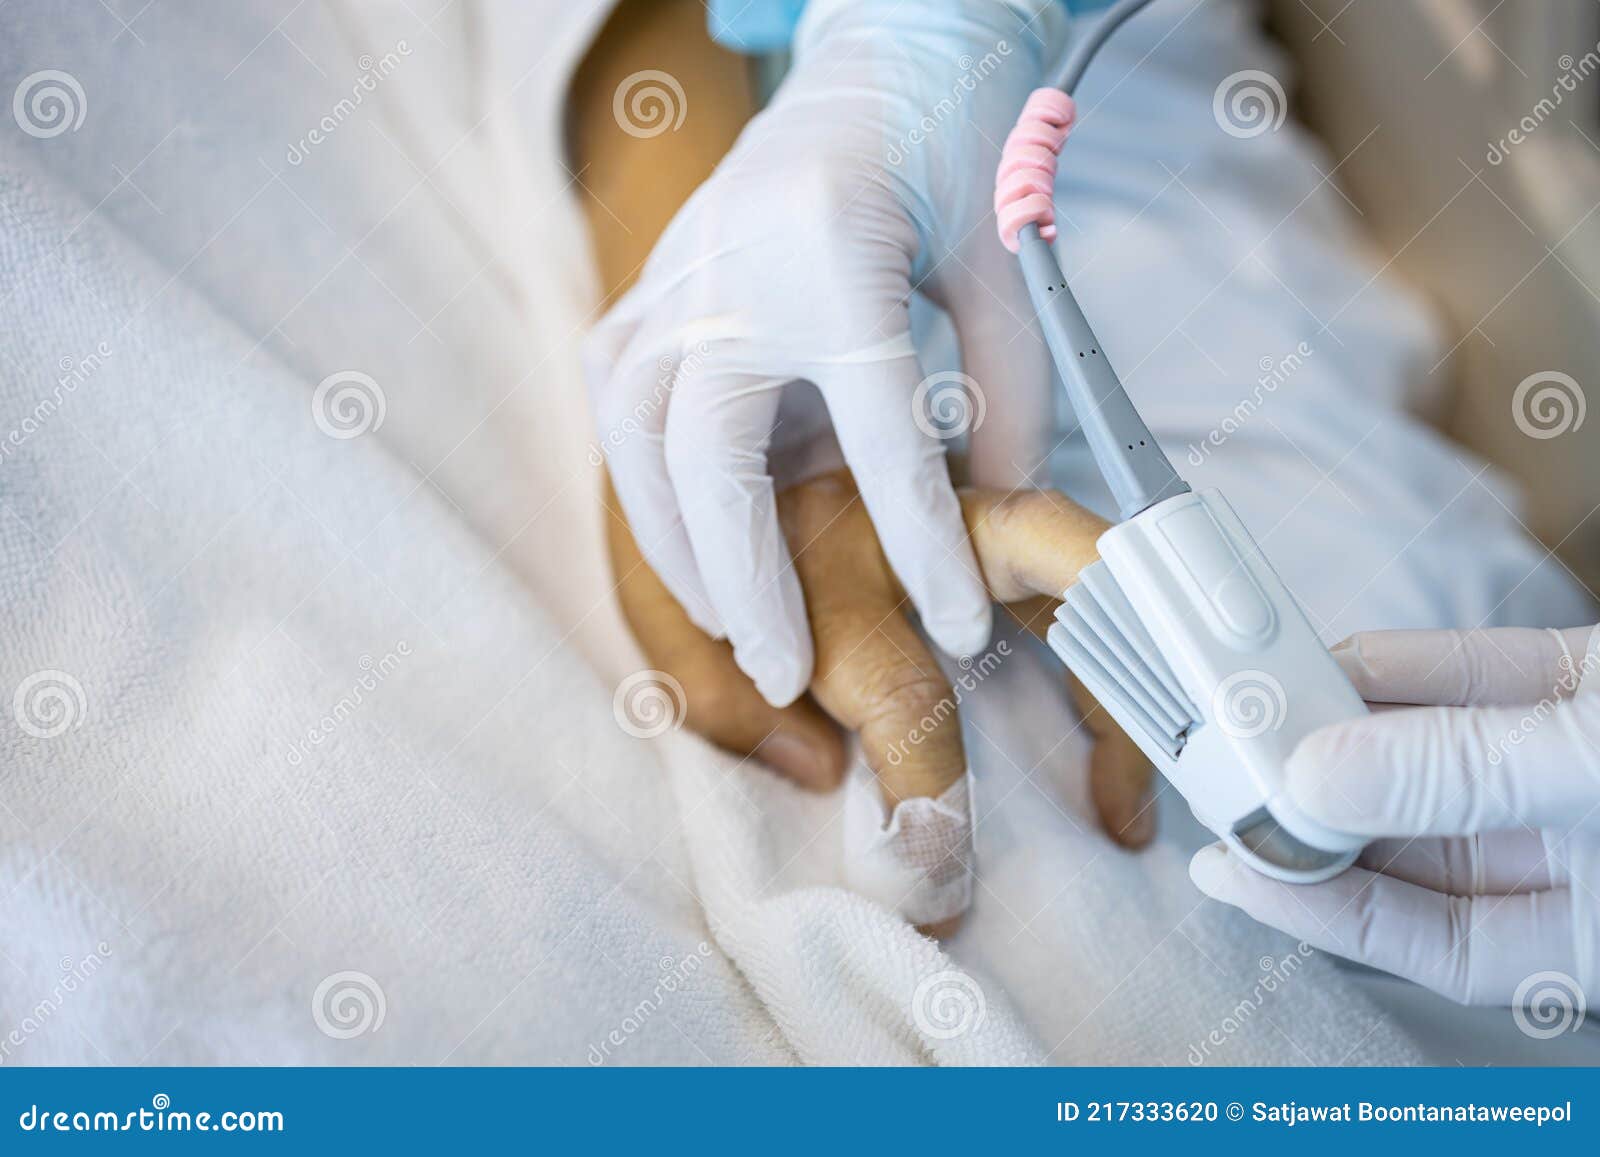 hand of an asian patient in a severe coma with an attached pulse oximeter on fingertip,nurse measuring heart rate,checking oxygen